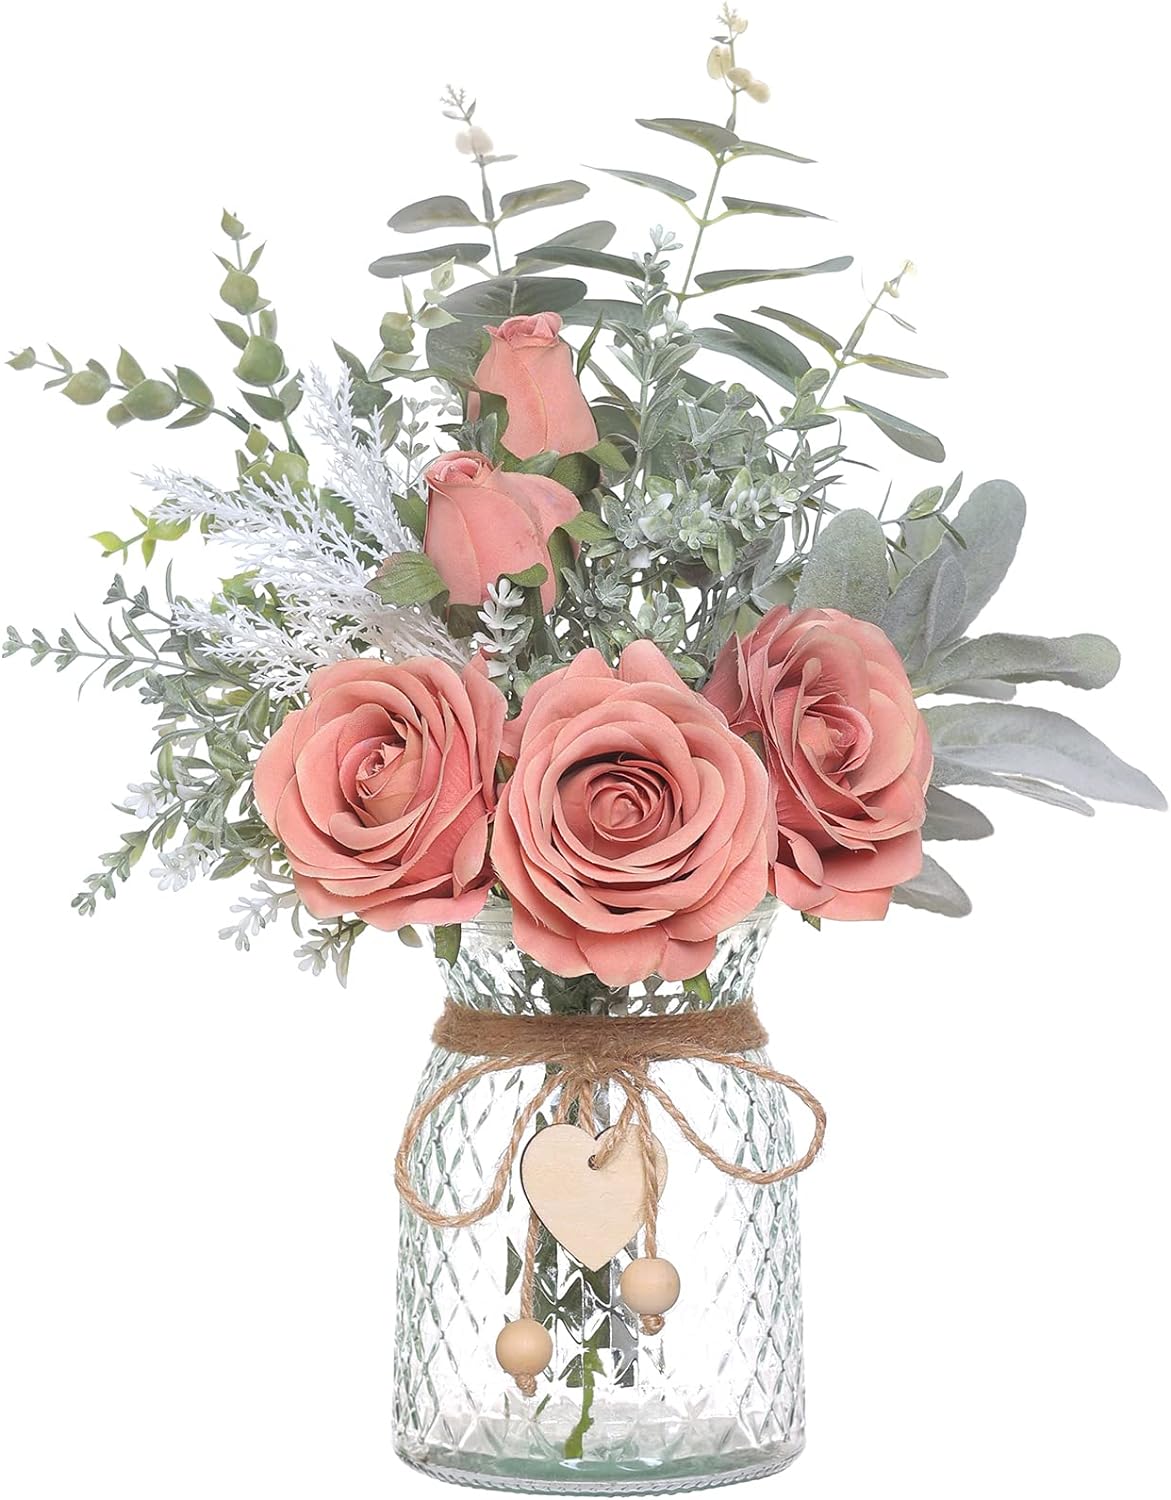 Faux Flowers with Vase,Artificial Silk Roses in Vase, Fake Plant Eucalyptus Flower Arrangement for Home Office Farmhouse Bathroom Dining Table Centerpiece Decorations Coffee Table Decor (Dusty Pink)